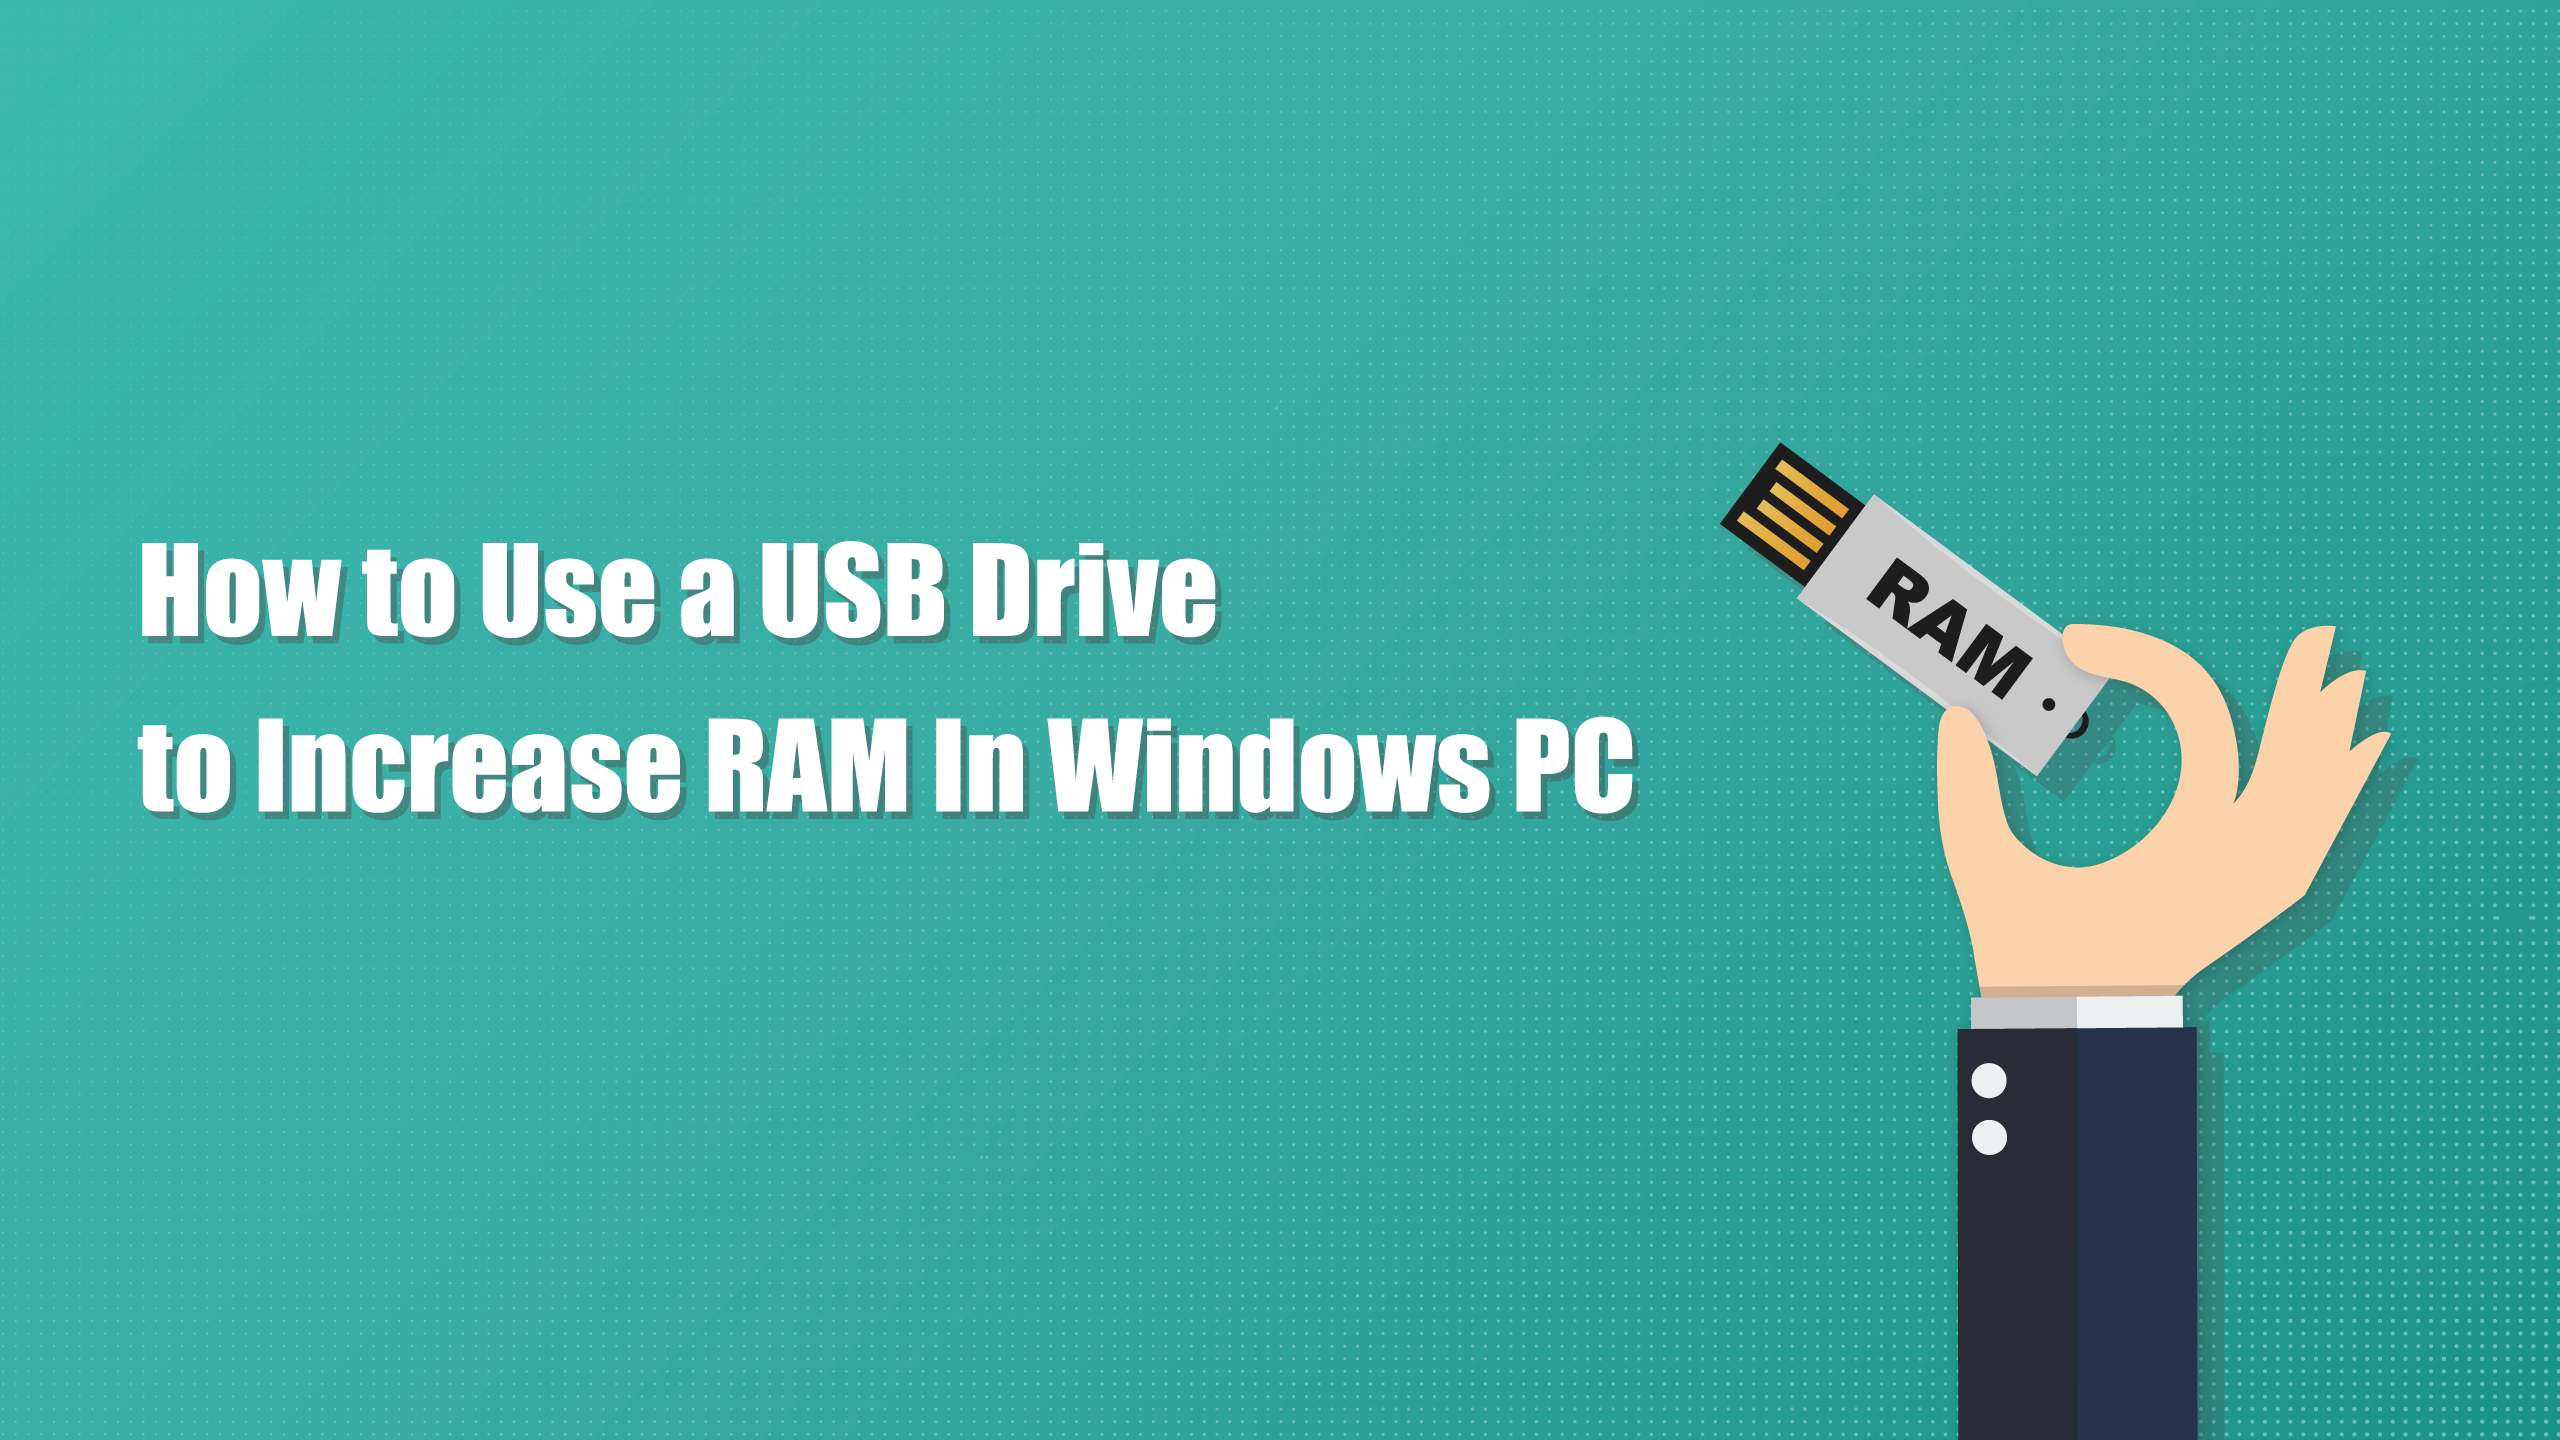 How To Use a USB Drive To Increase RAM in Windows PC